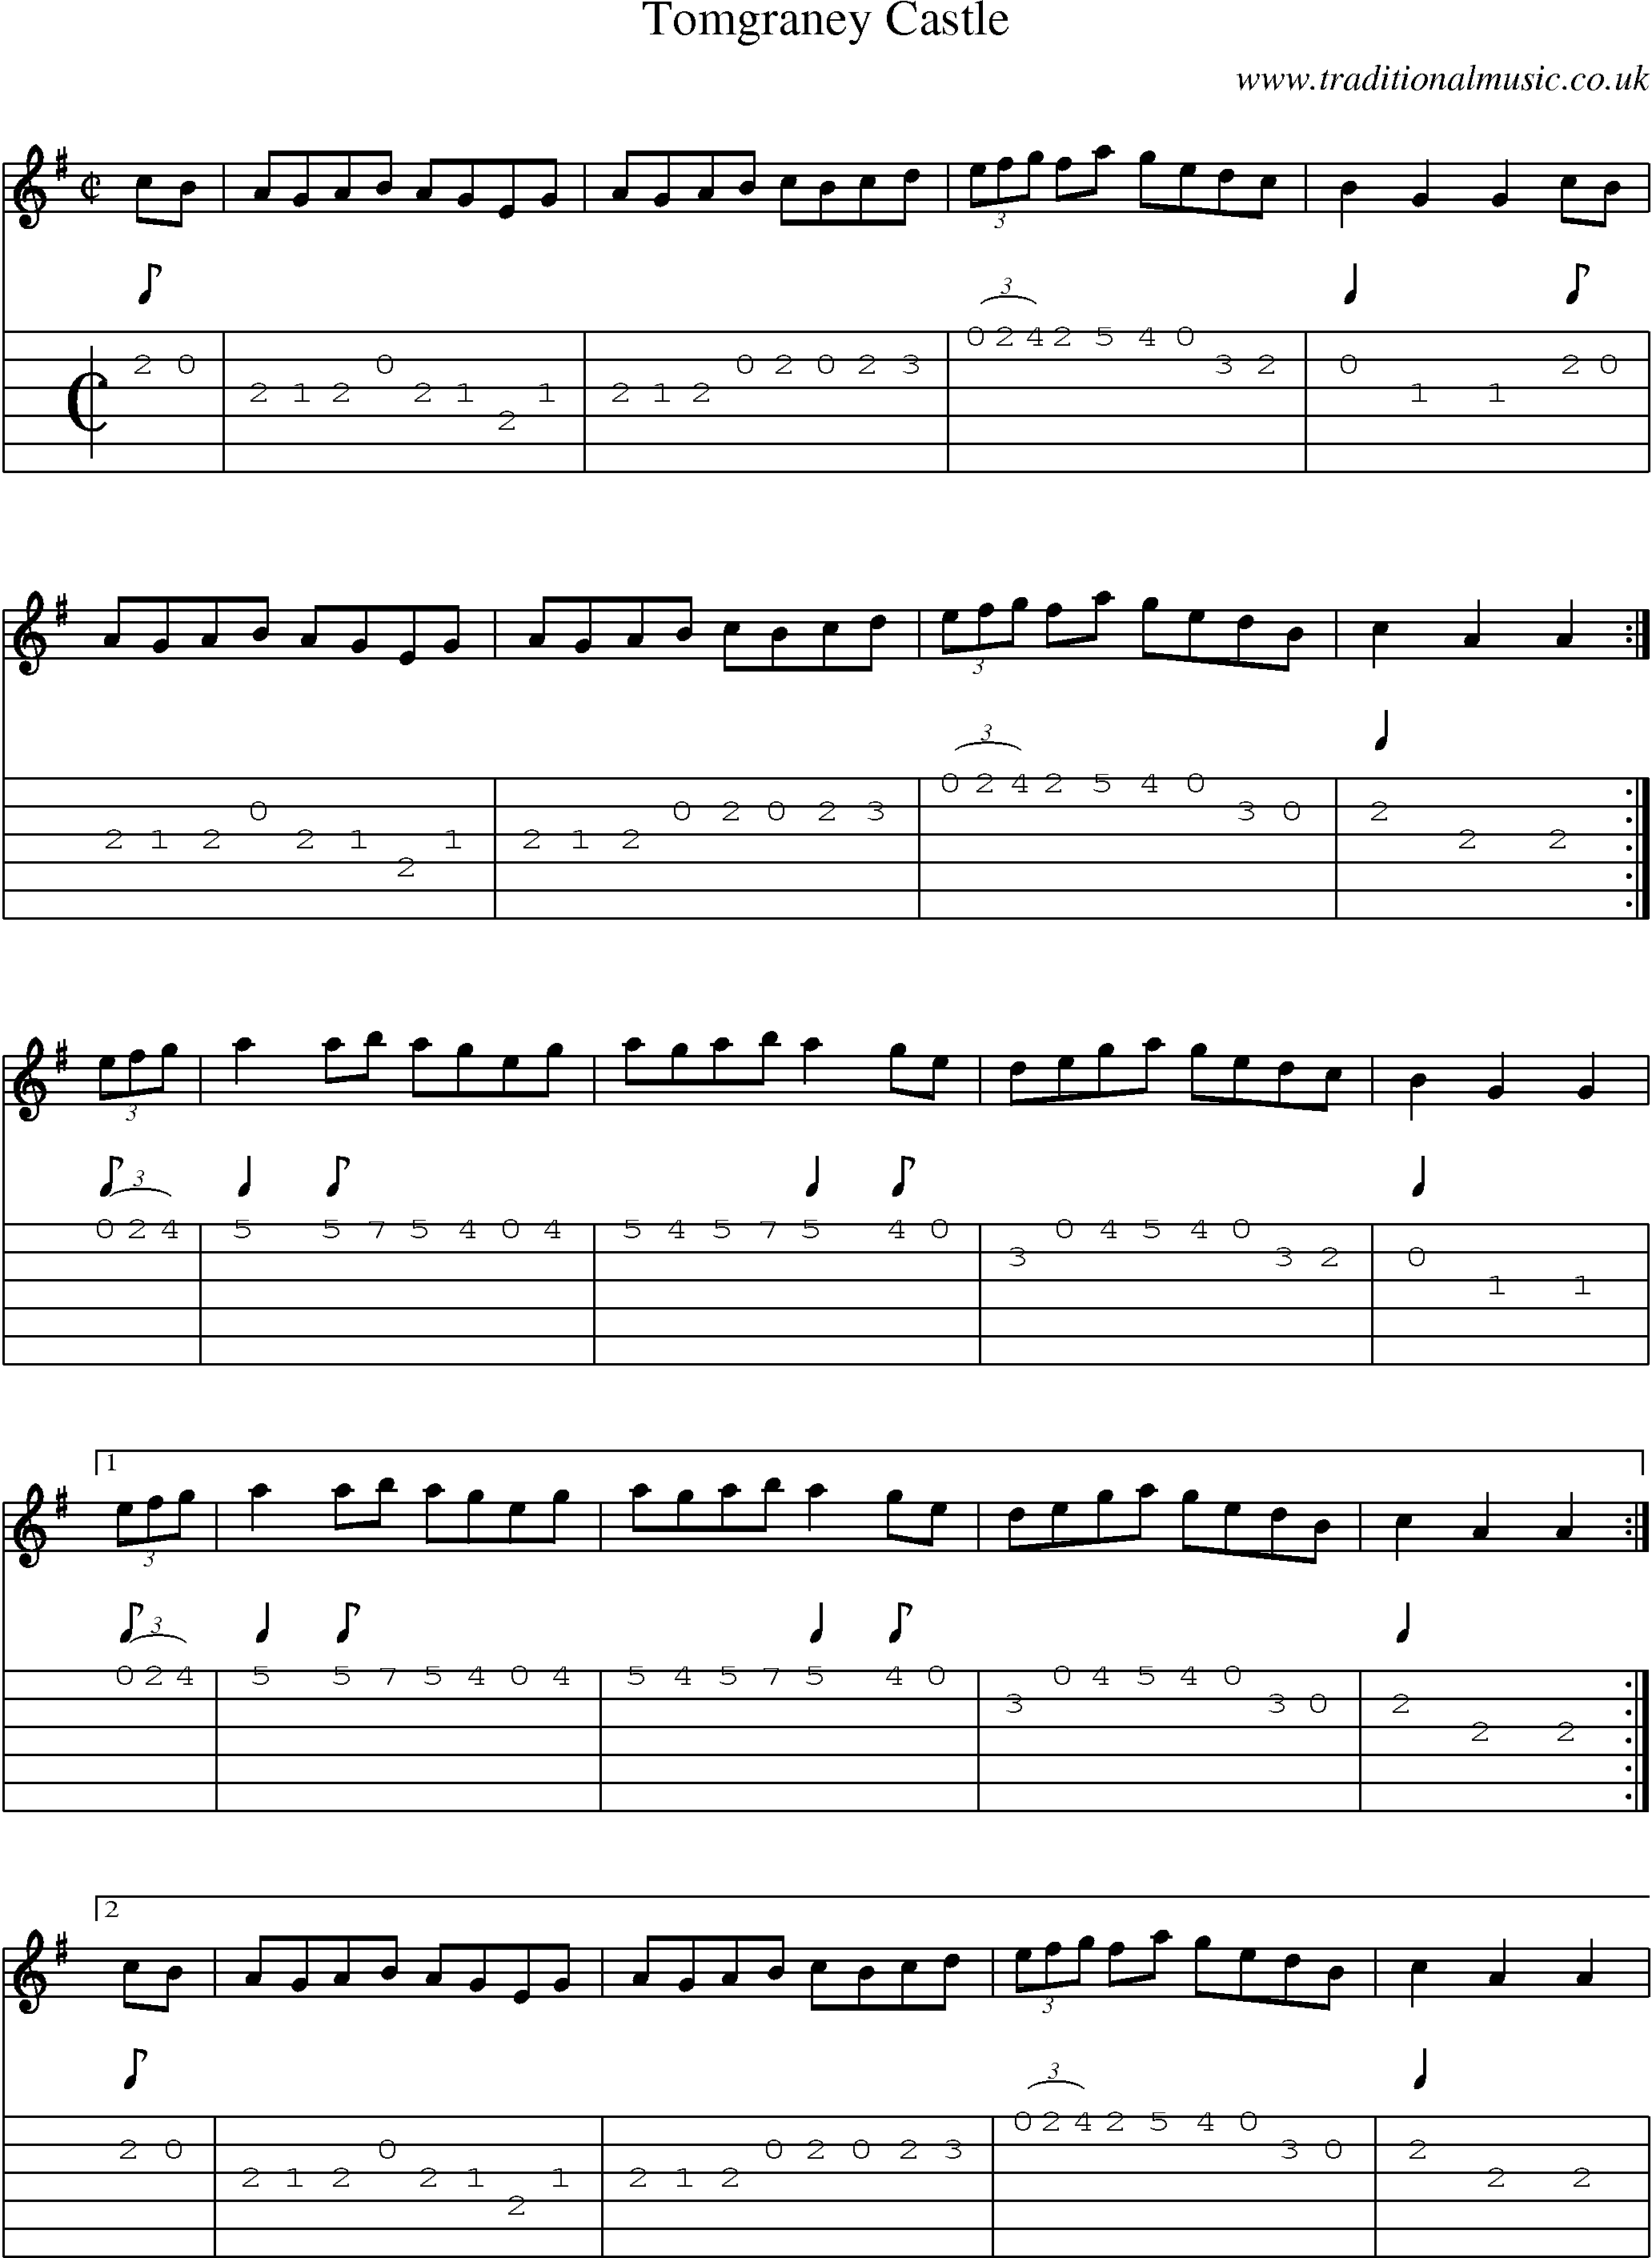 Music Score and Guitar Tabs for Tomgraney Castle